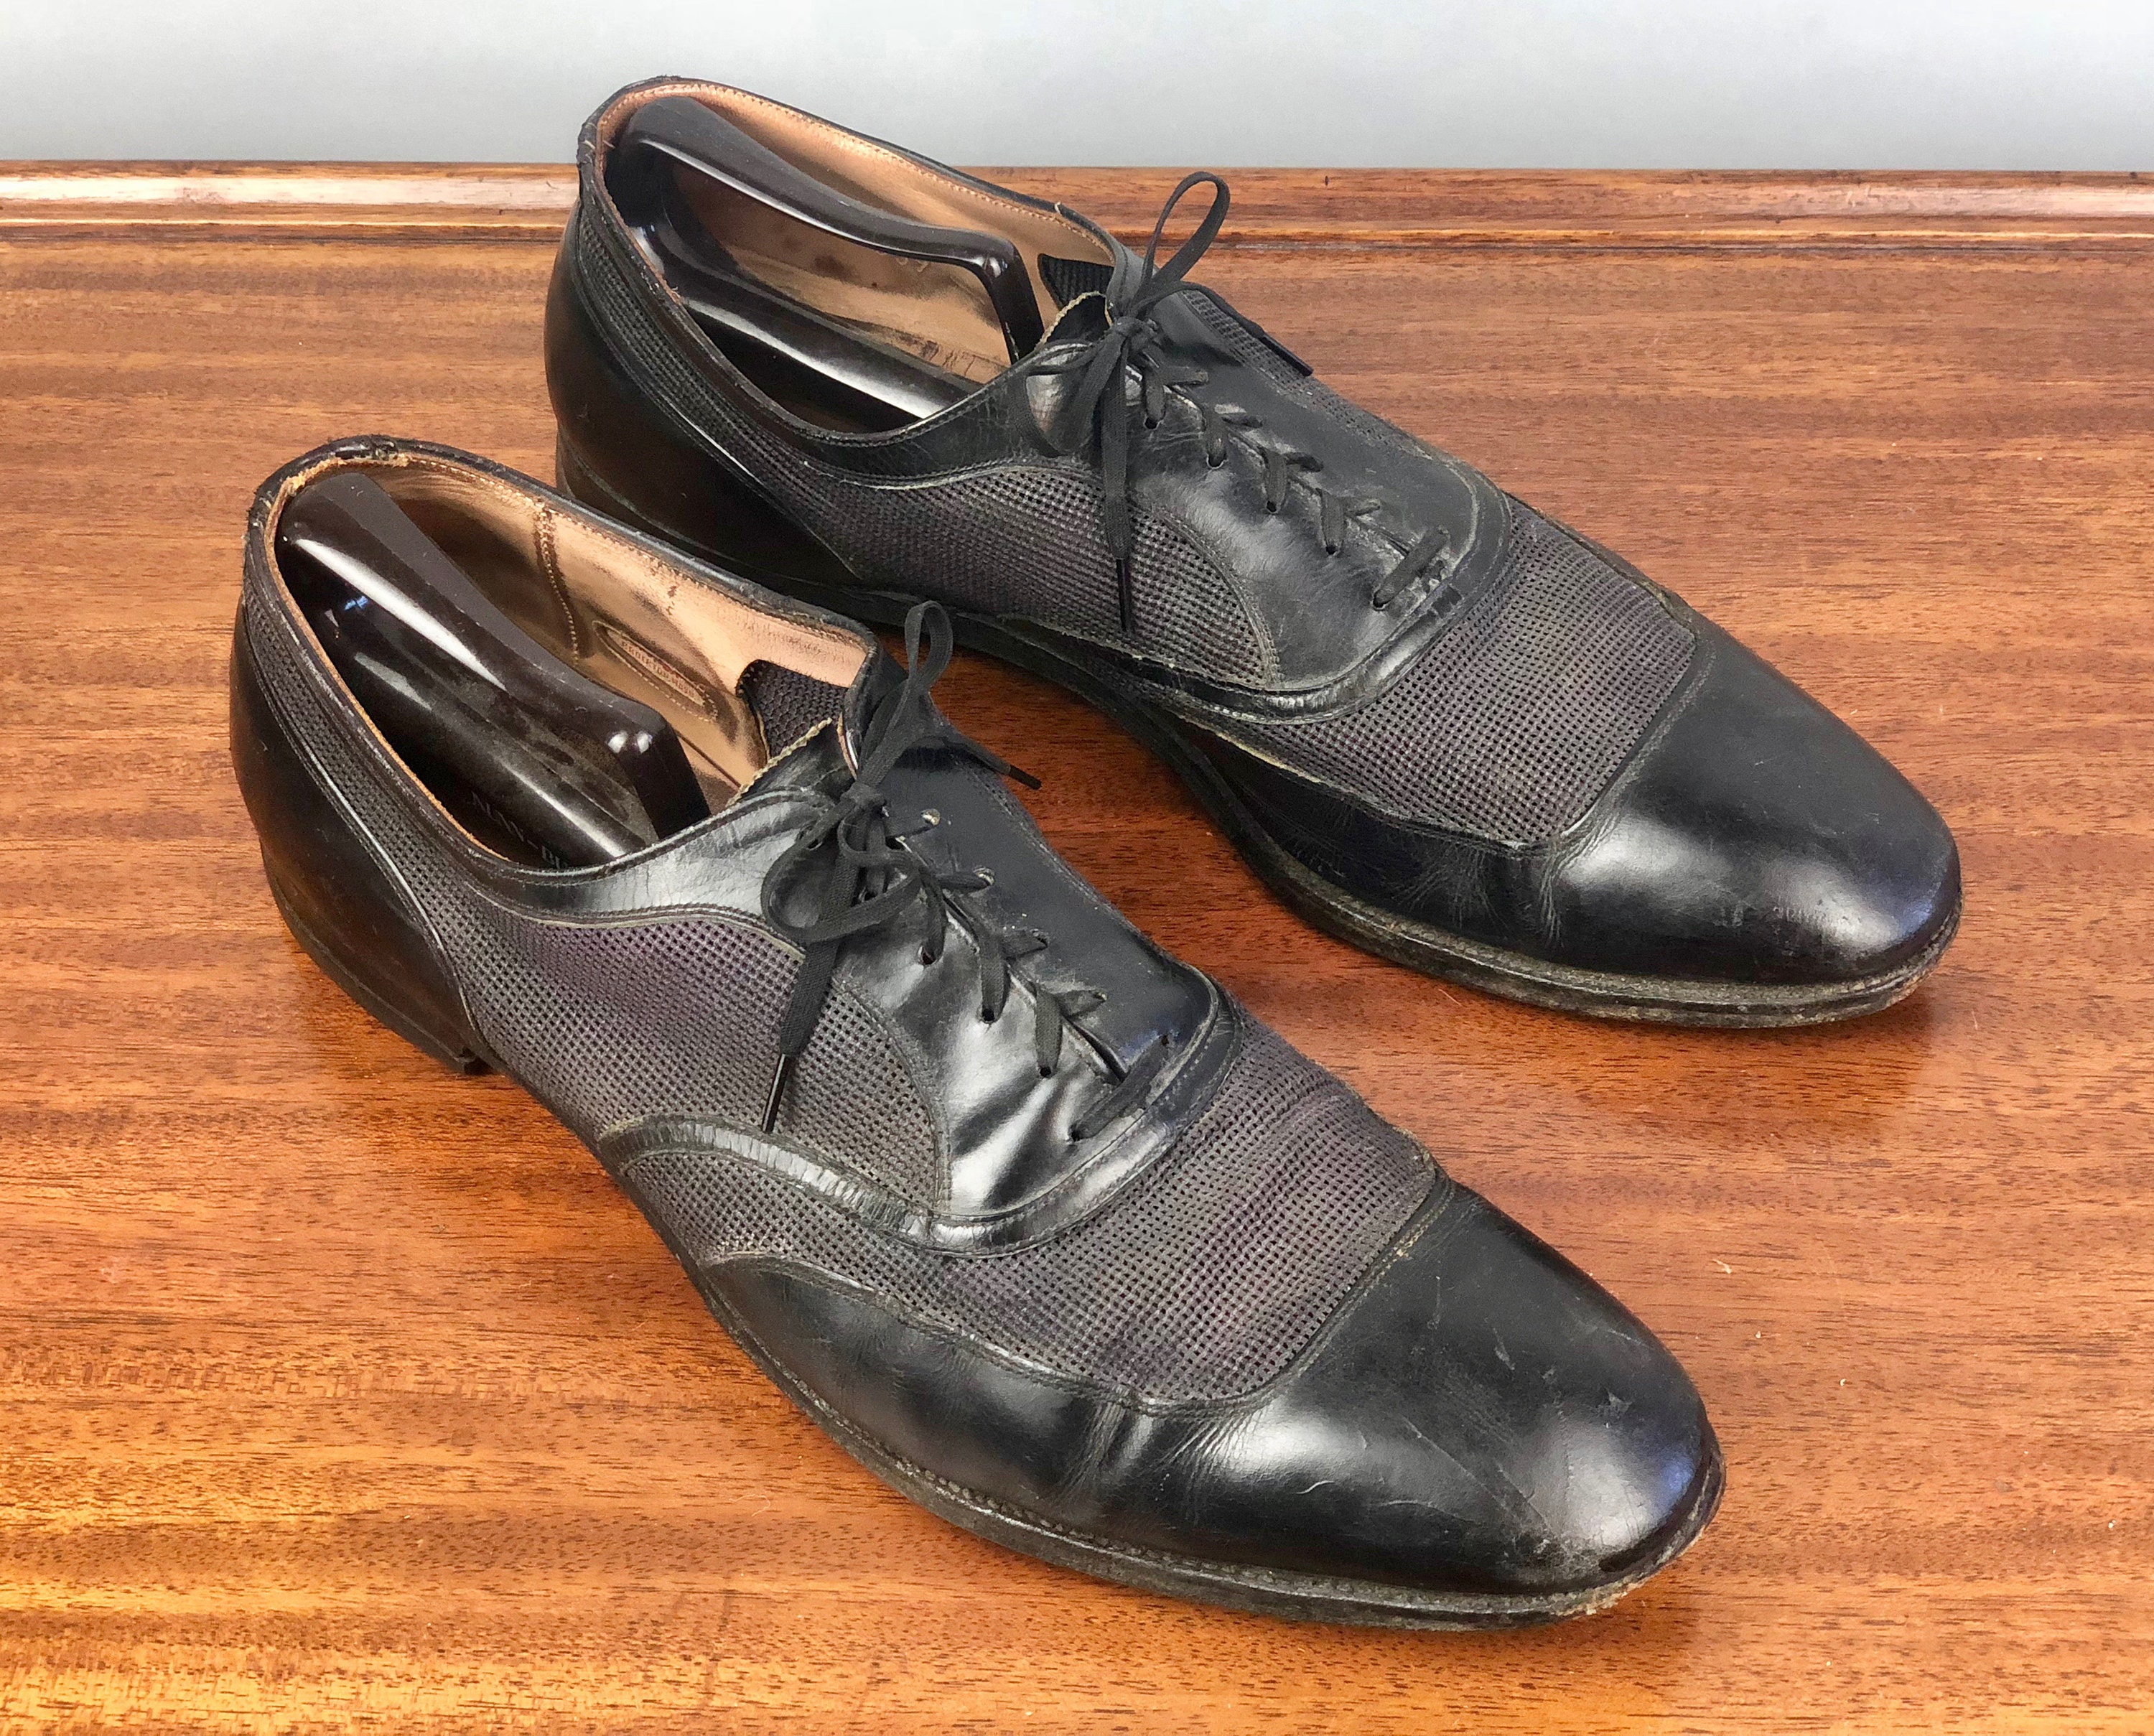 1940s Ventilated Mens Shoes, Vintage 40s Black Apron Toe Oxford Leather  Summer Shoes with Nylon Mesh by Knapp